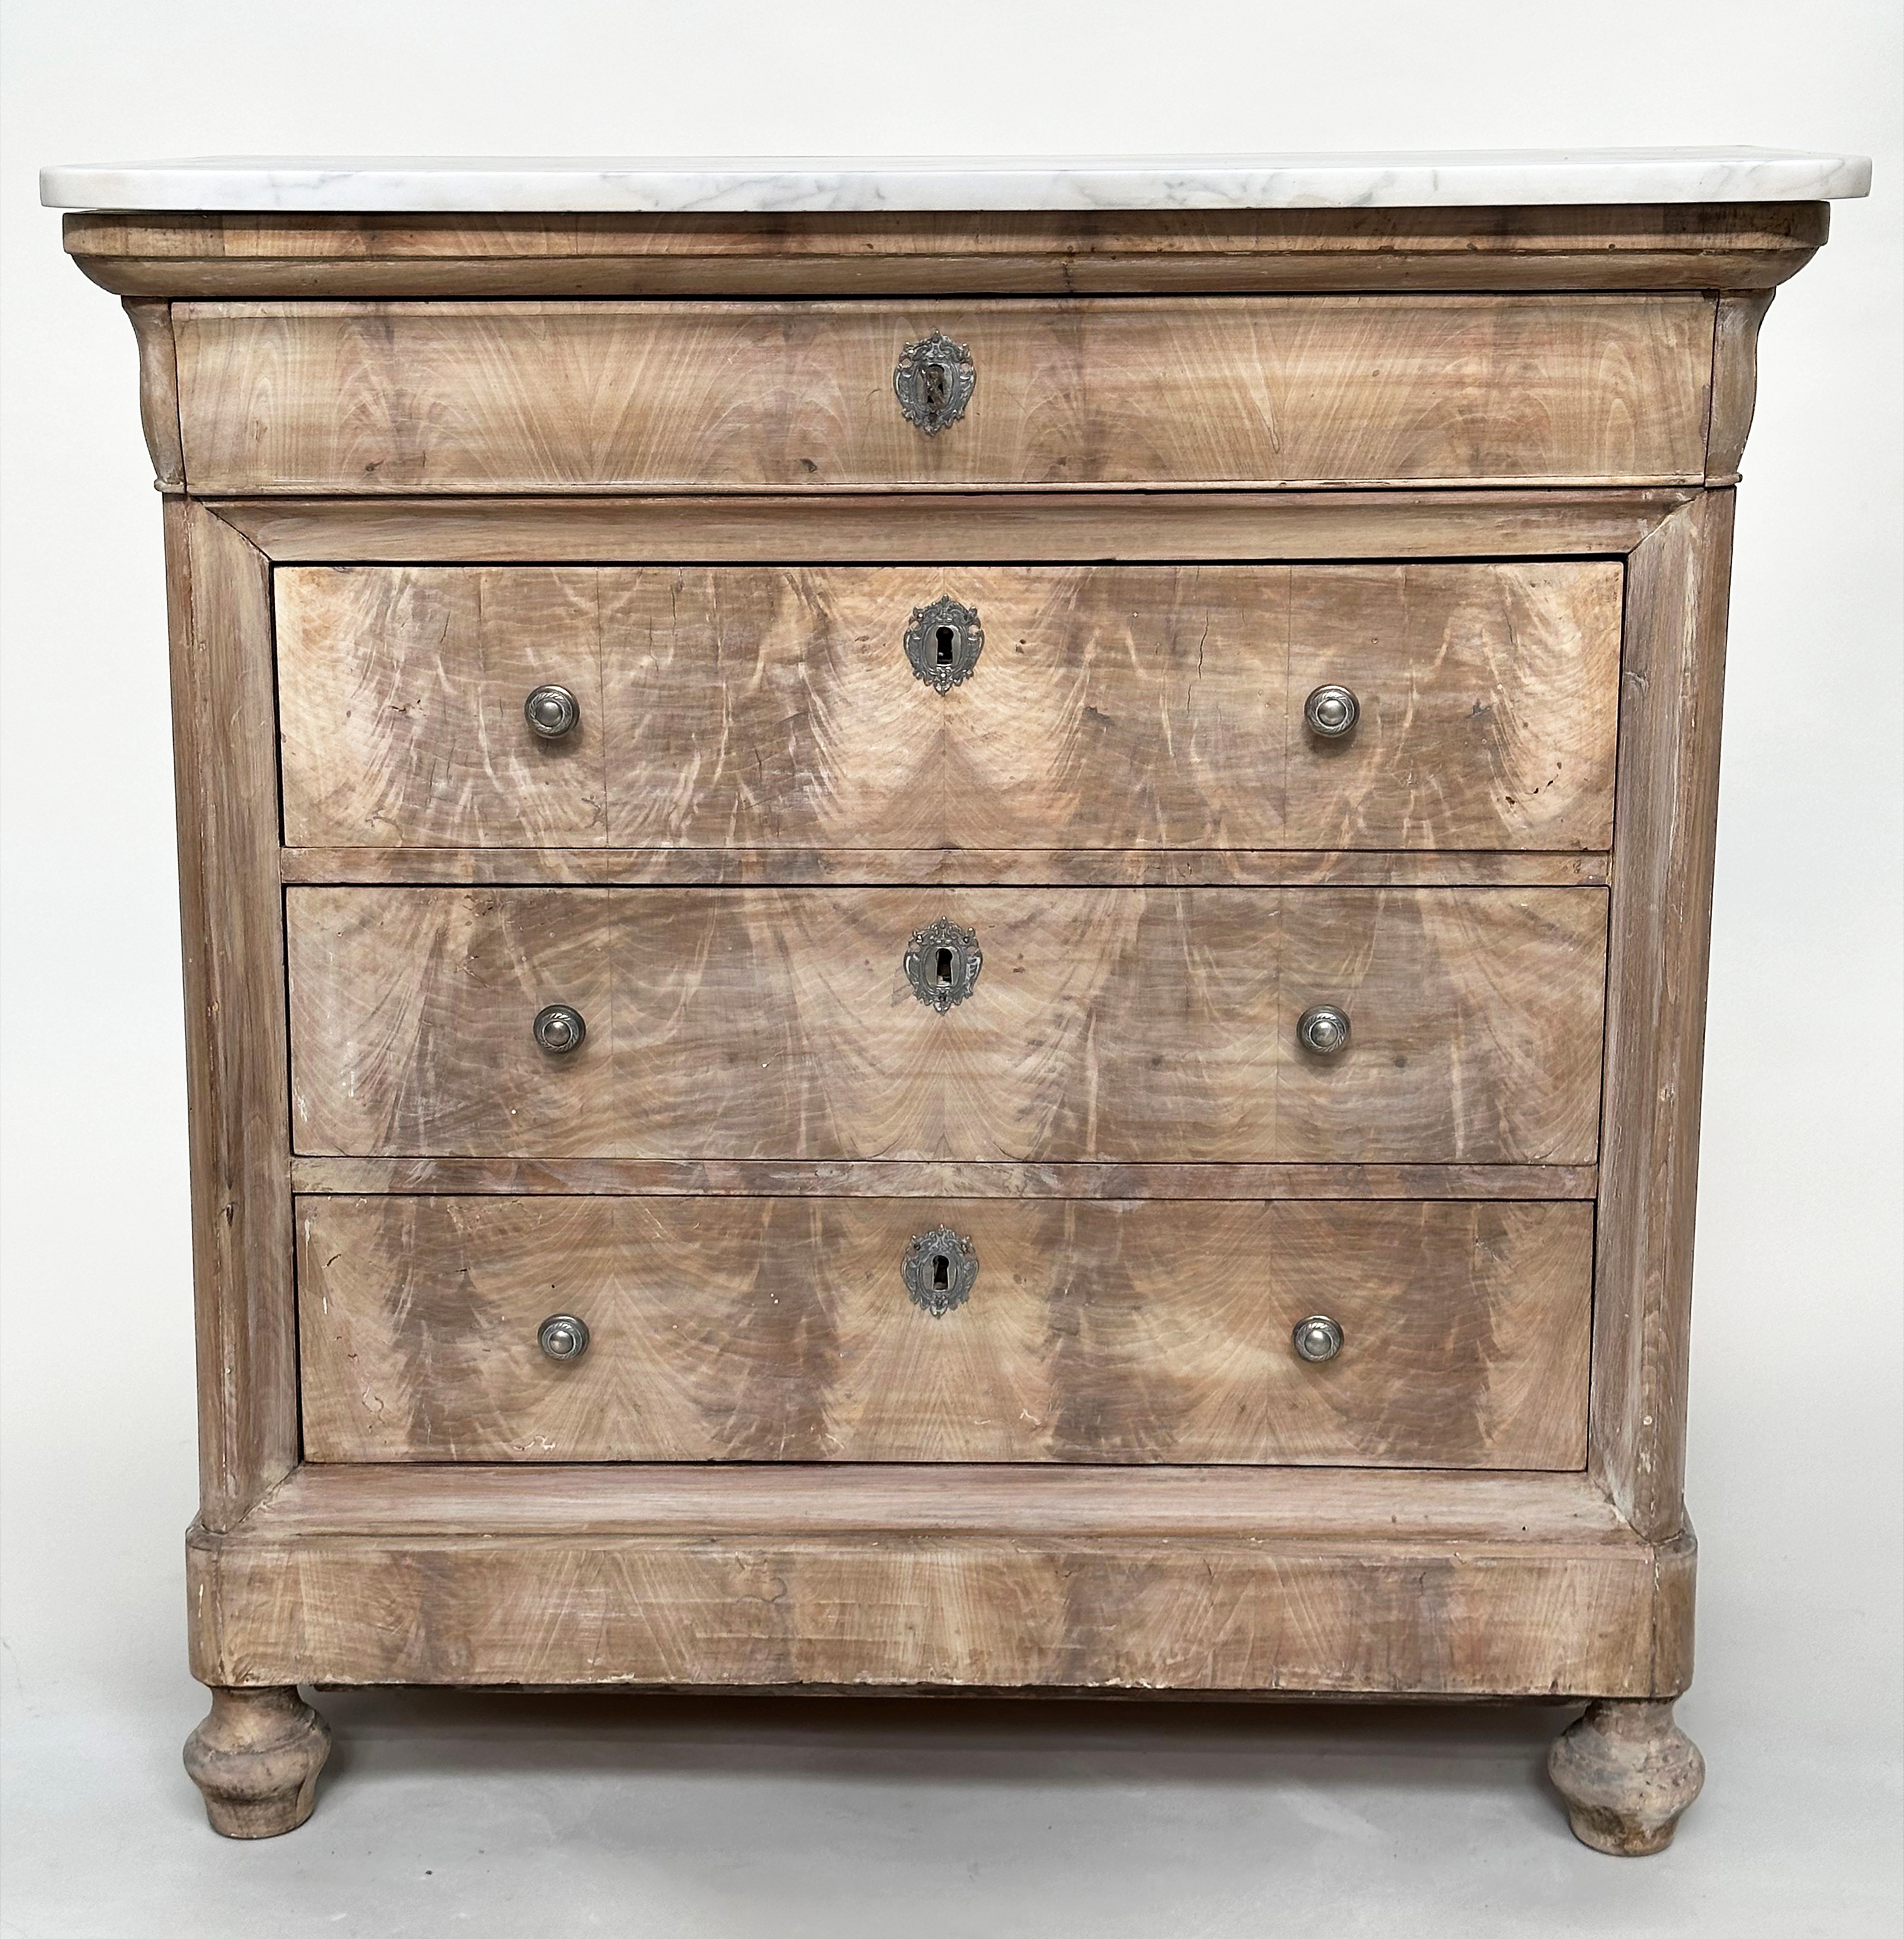 HALL COMMODE, 19th century French Louis Philippe flame mahogany with four long drawers and turned